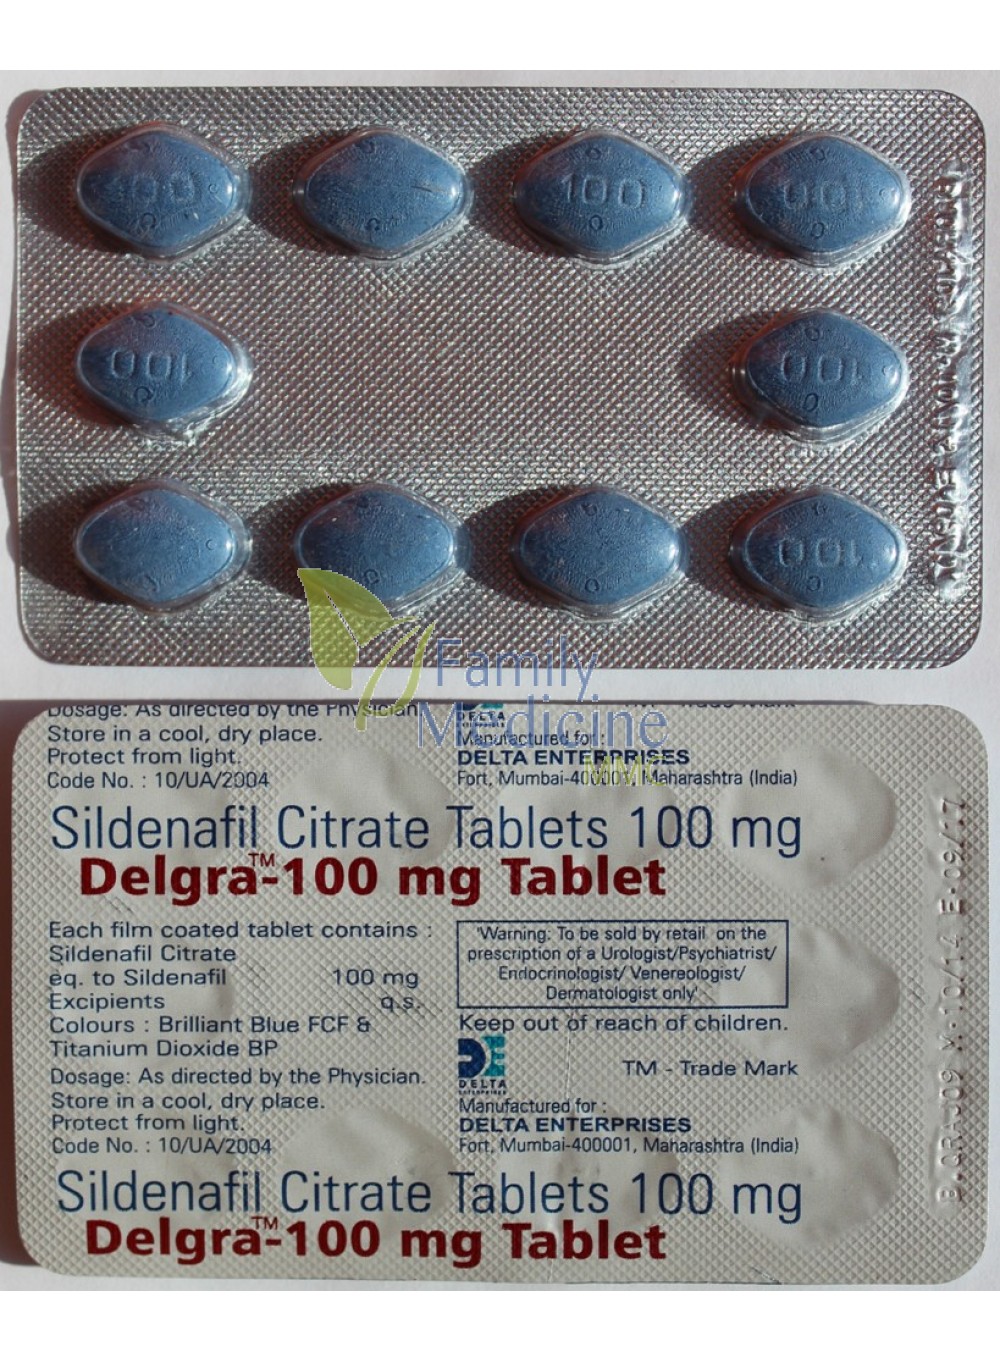 about azithromycin 500mg in hindi